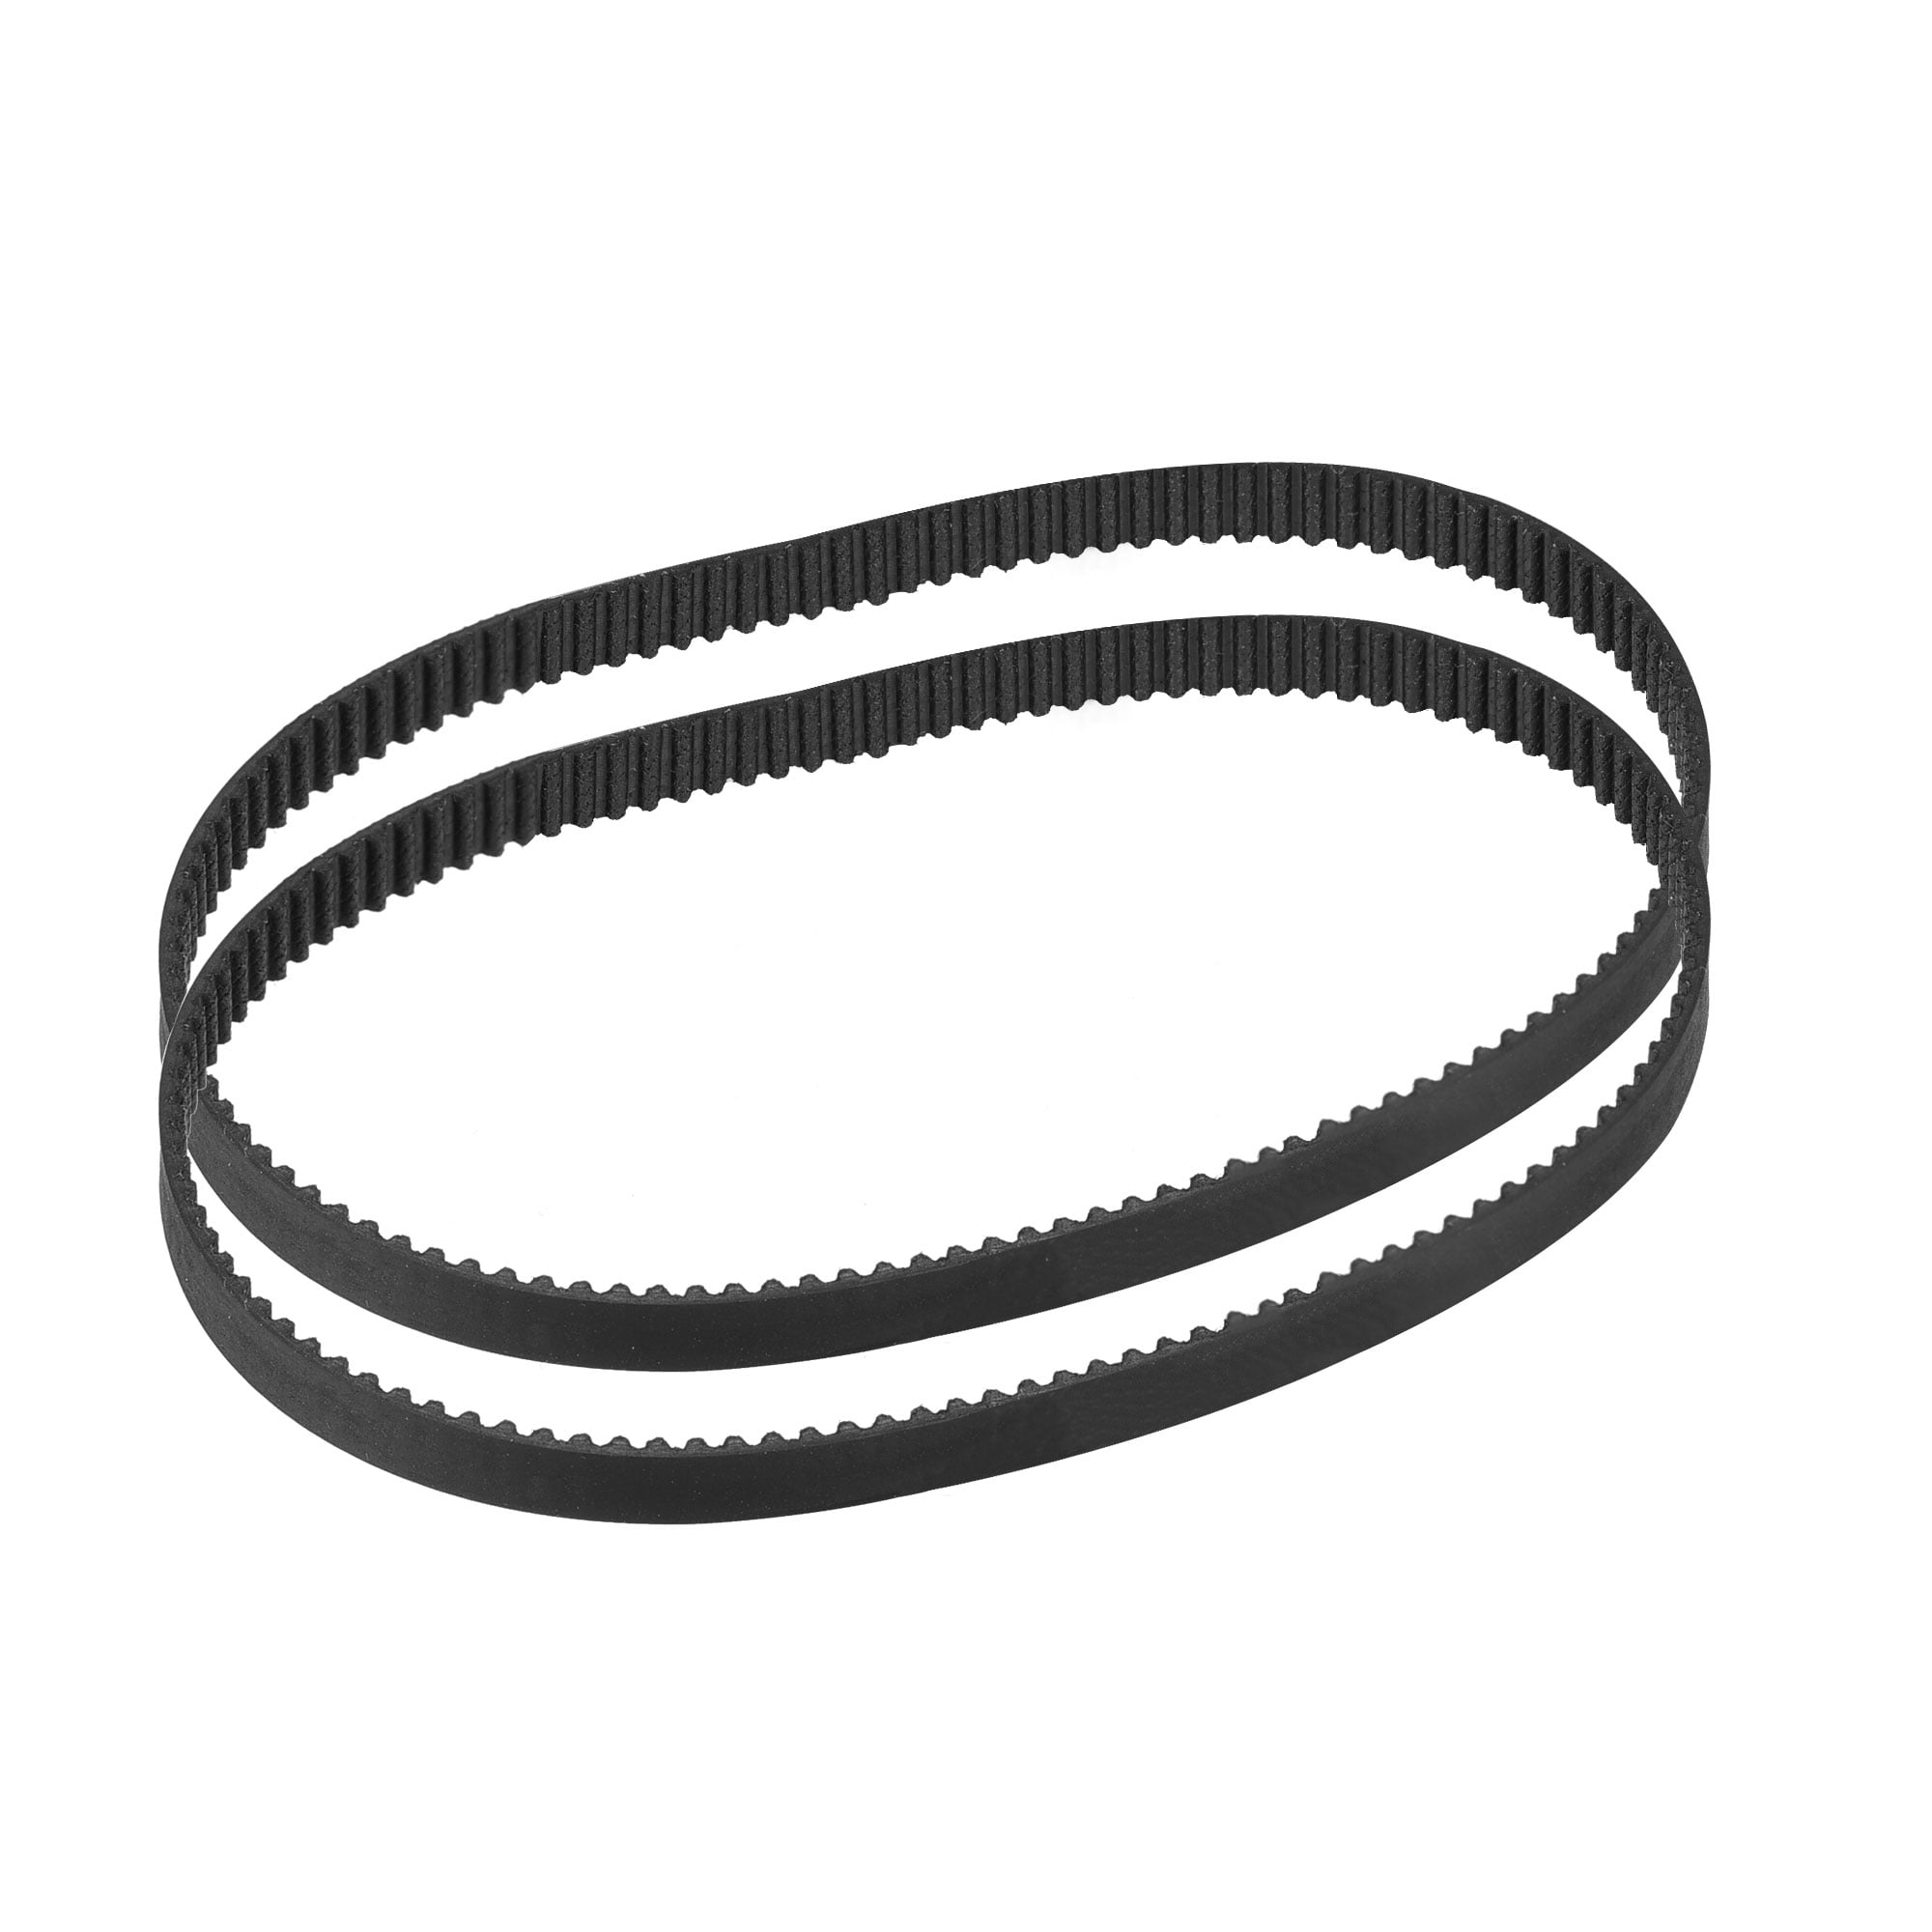 uxcell 2pcs Timing Belt 220mm Circumference 6mm Width Closed Fit Synchronous Pulley Wheel for 3D Printer 